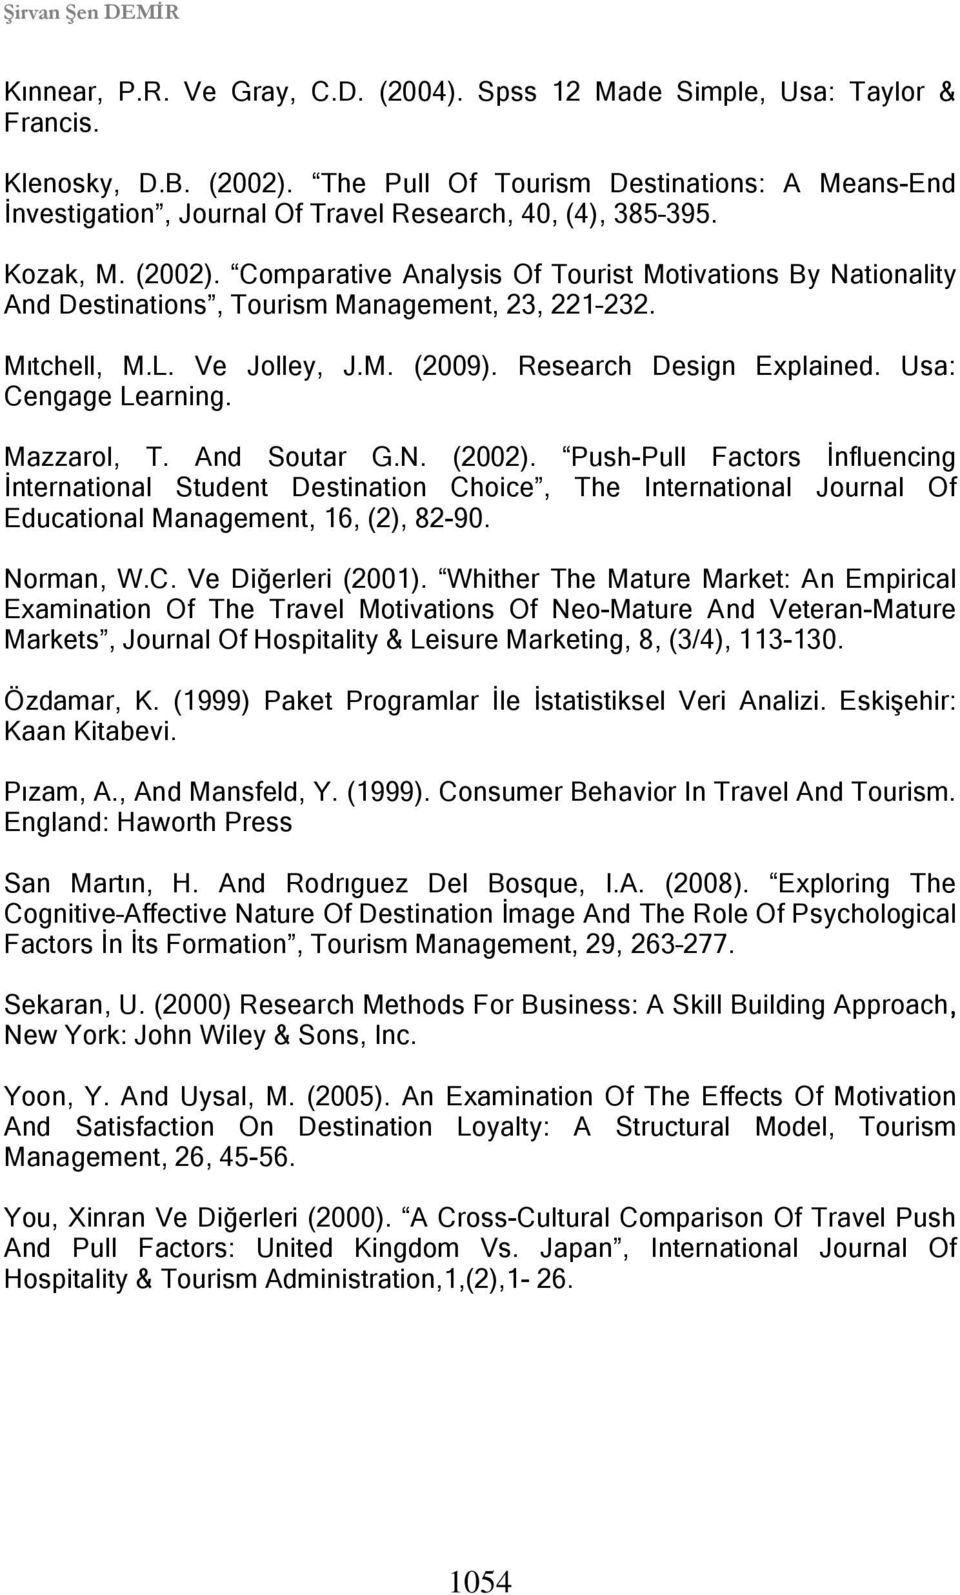 Comparative Analysis Of Tourist Motivations By Nationality And Destinations, Tourism Management, 23, 221 232. Mıtchell, M.L. Ve Jolley, J.M. (2009). Research Design Explained. Usa: Cengage Learning.